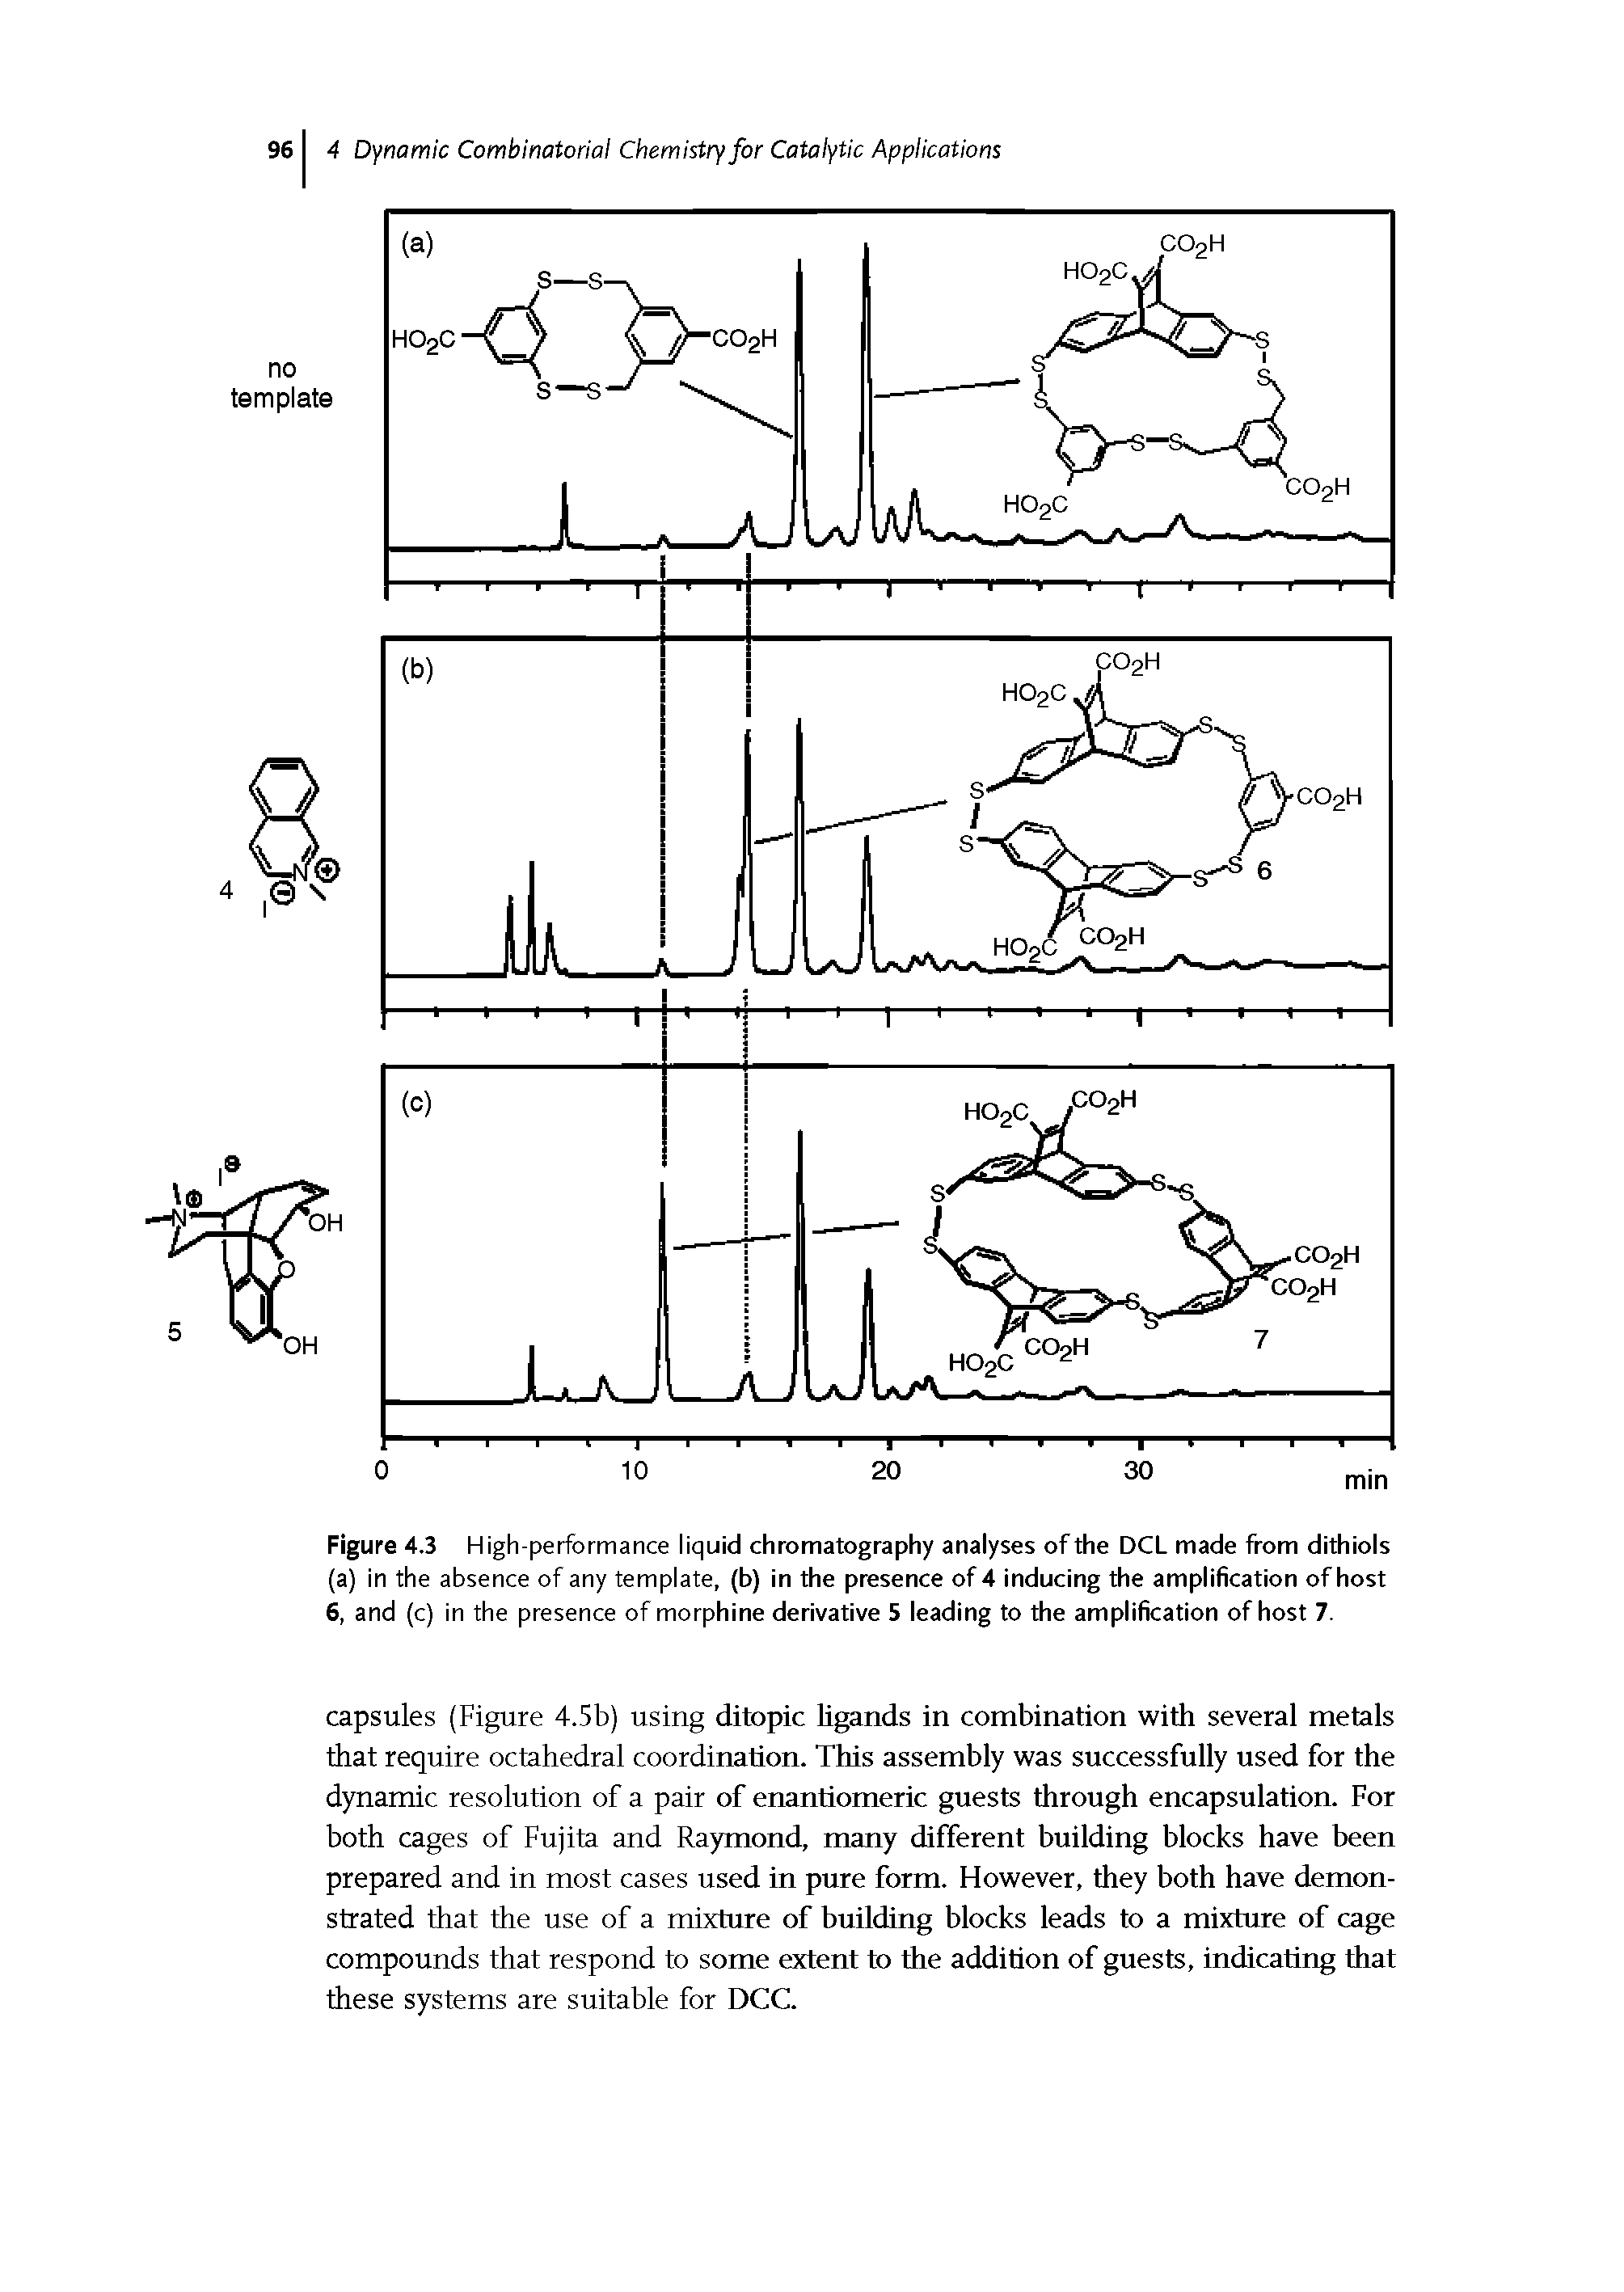 Figure 4.3 High-performance liquid chromatography analyses of the DCL made from dithiols (a) in the absence of any template, (b) in the presence of 4 inducing the amplification of host 6, and (c) in the presence of morphine derivative 5 leading to the amplification of host 7.